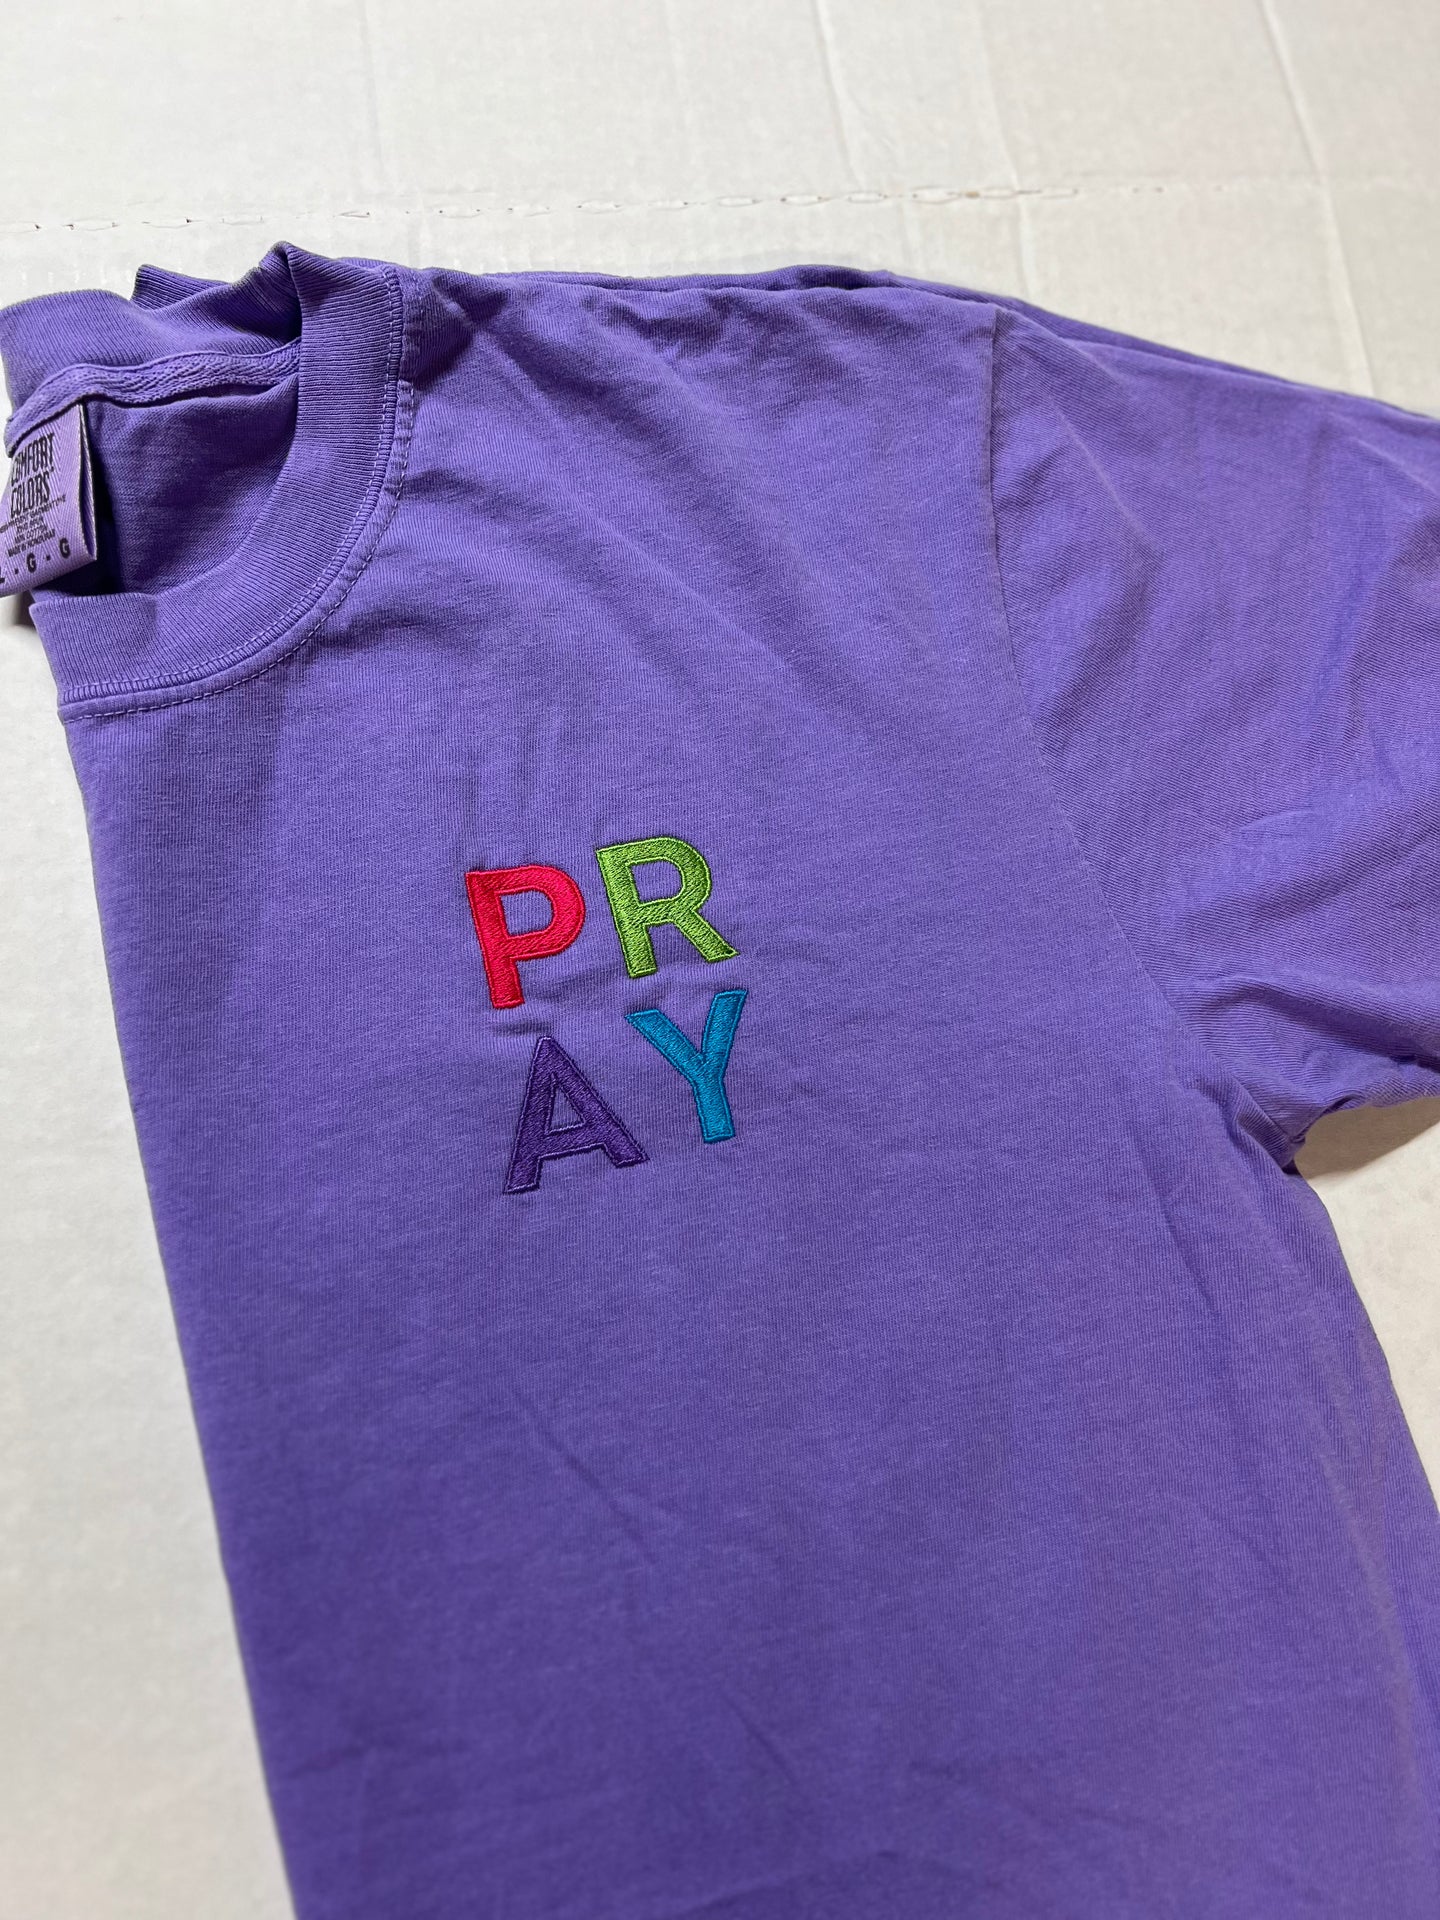 PRAY Embroidered Comfort Color T-Shirt, Soft Purple Tee